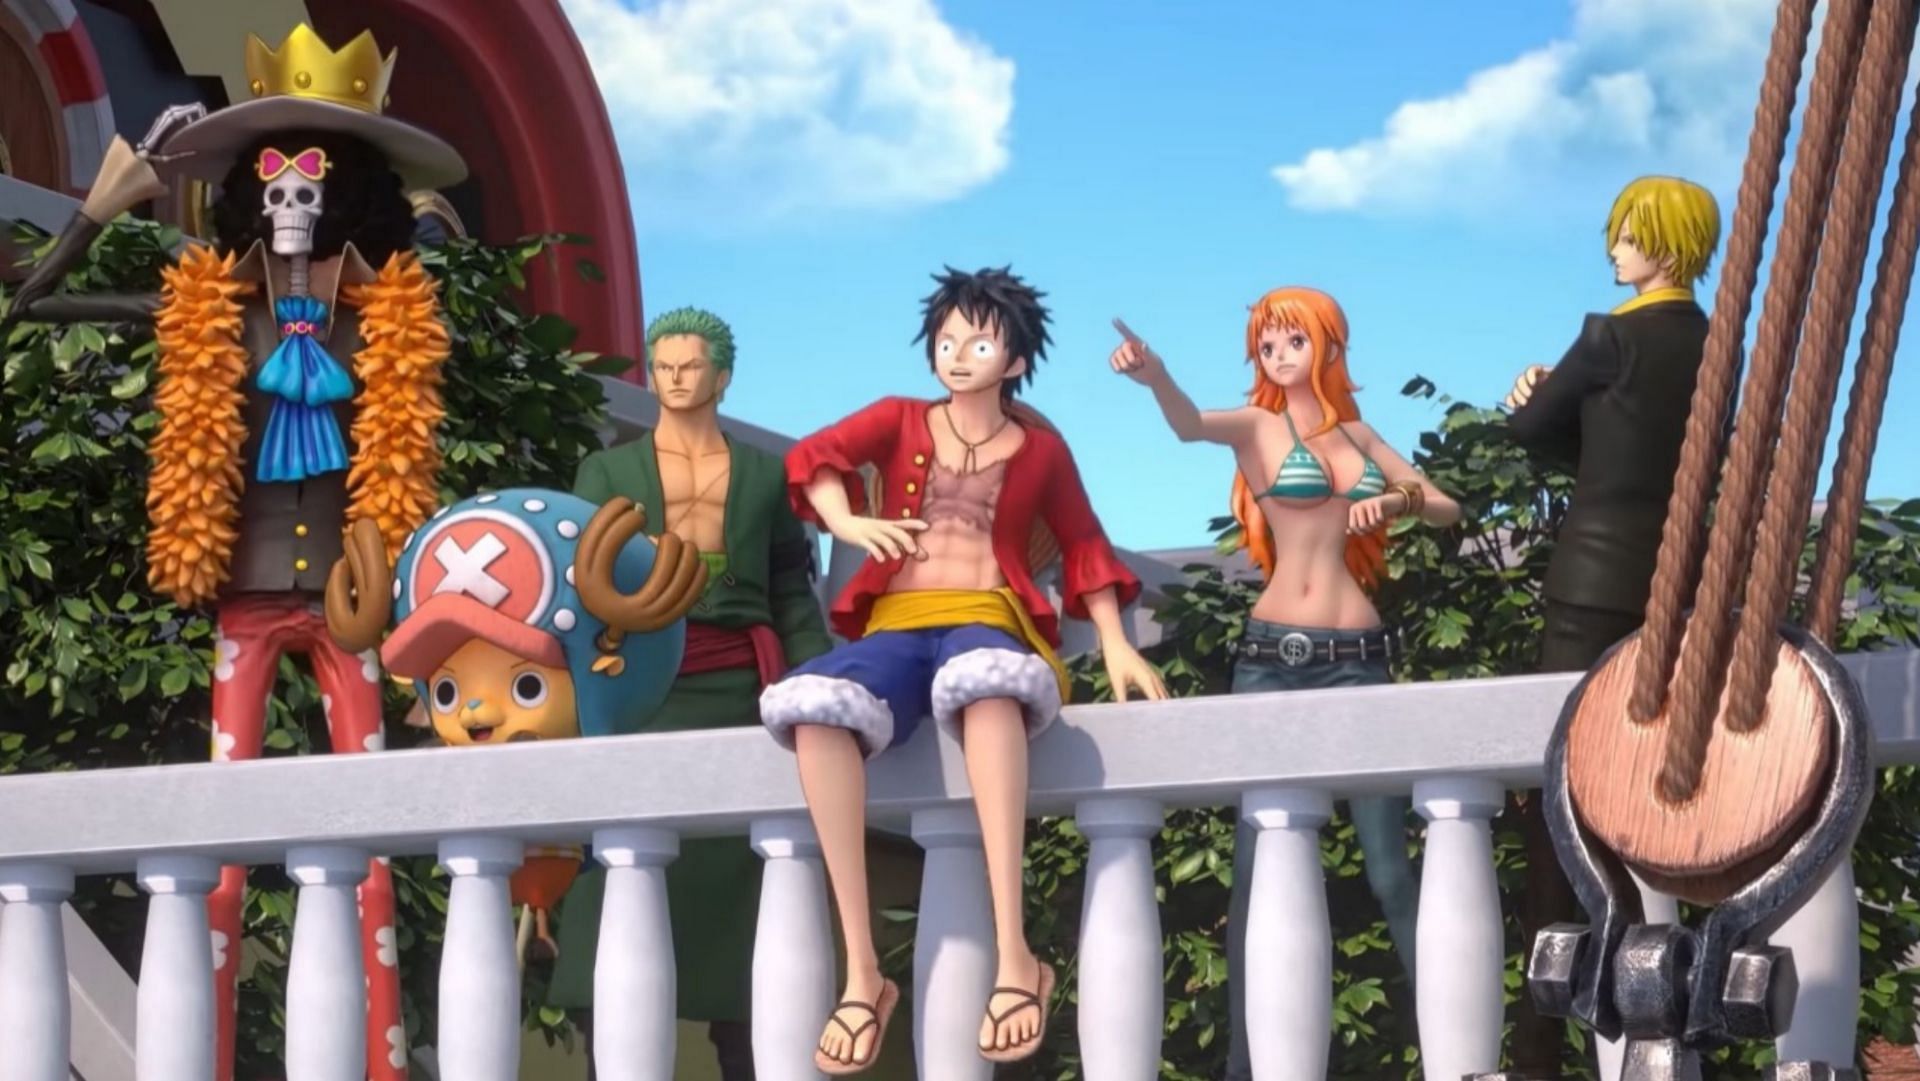 When does One Piece Odyssey take place in the One Piece timeline